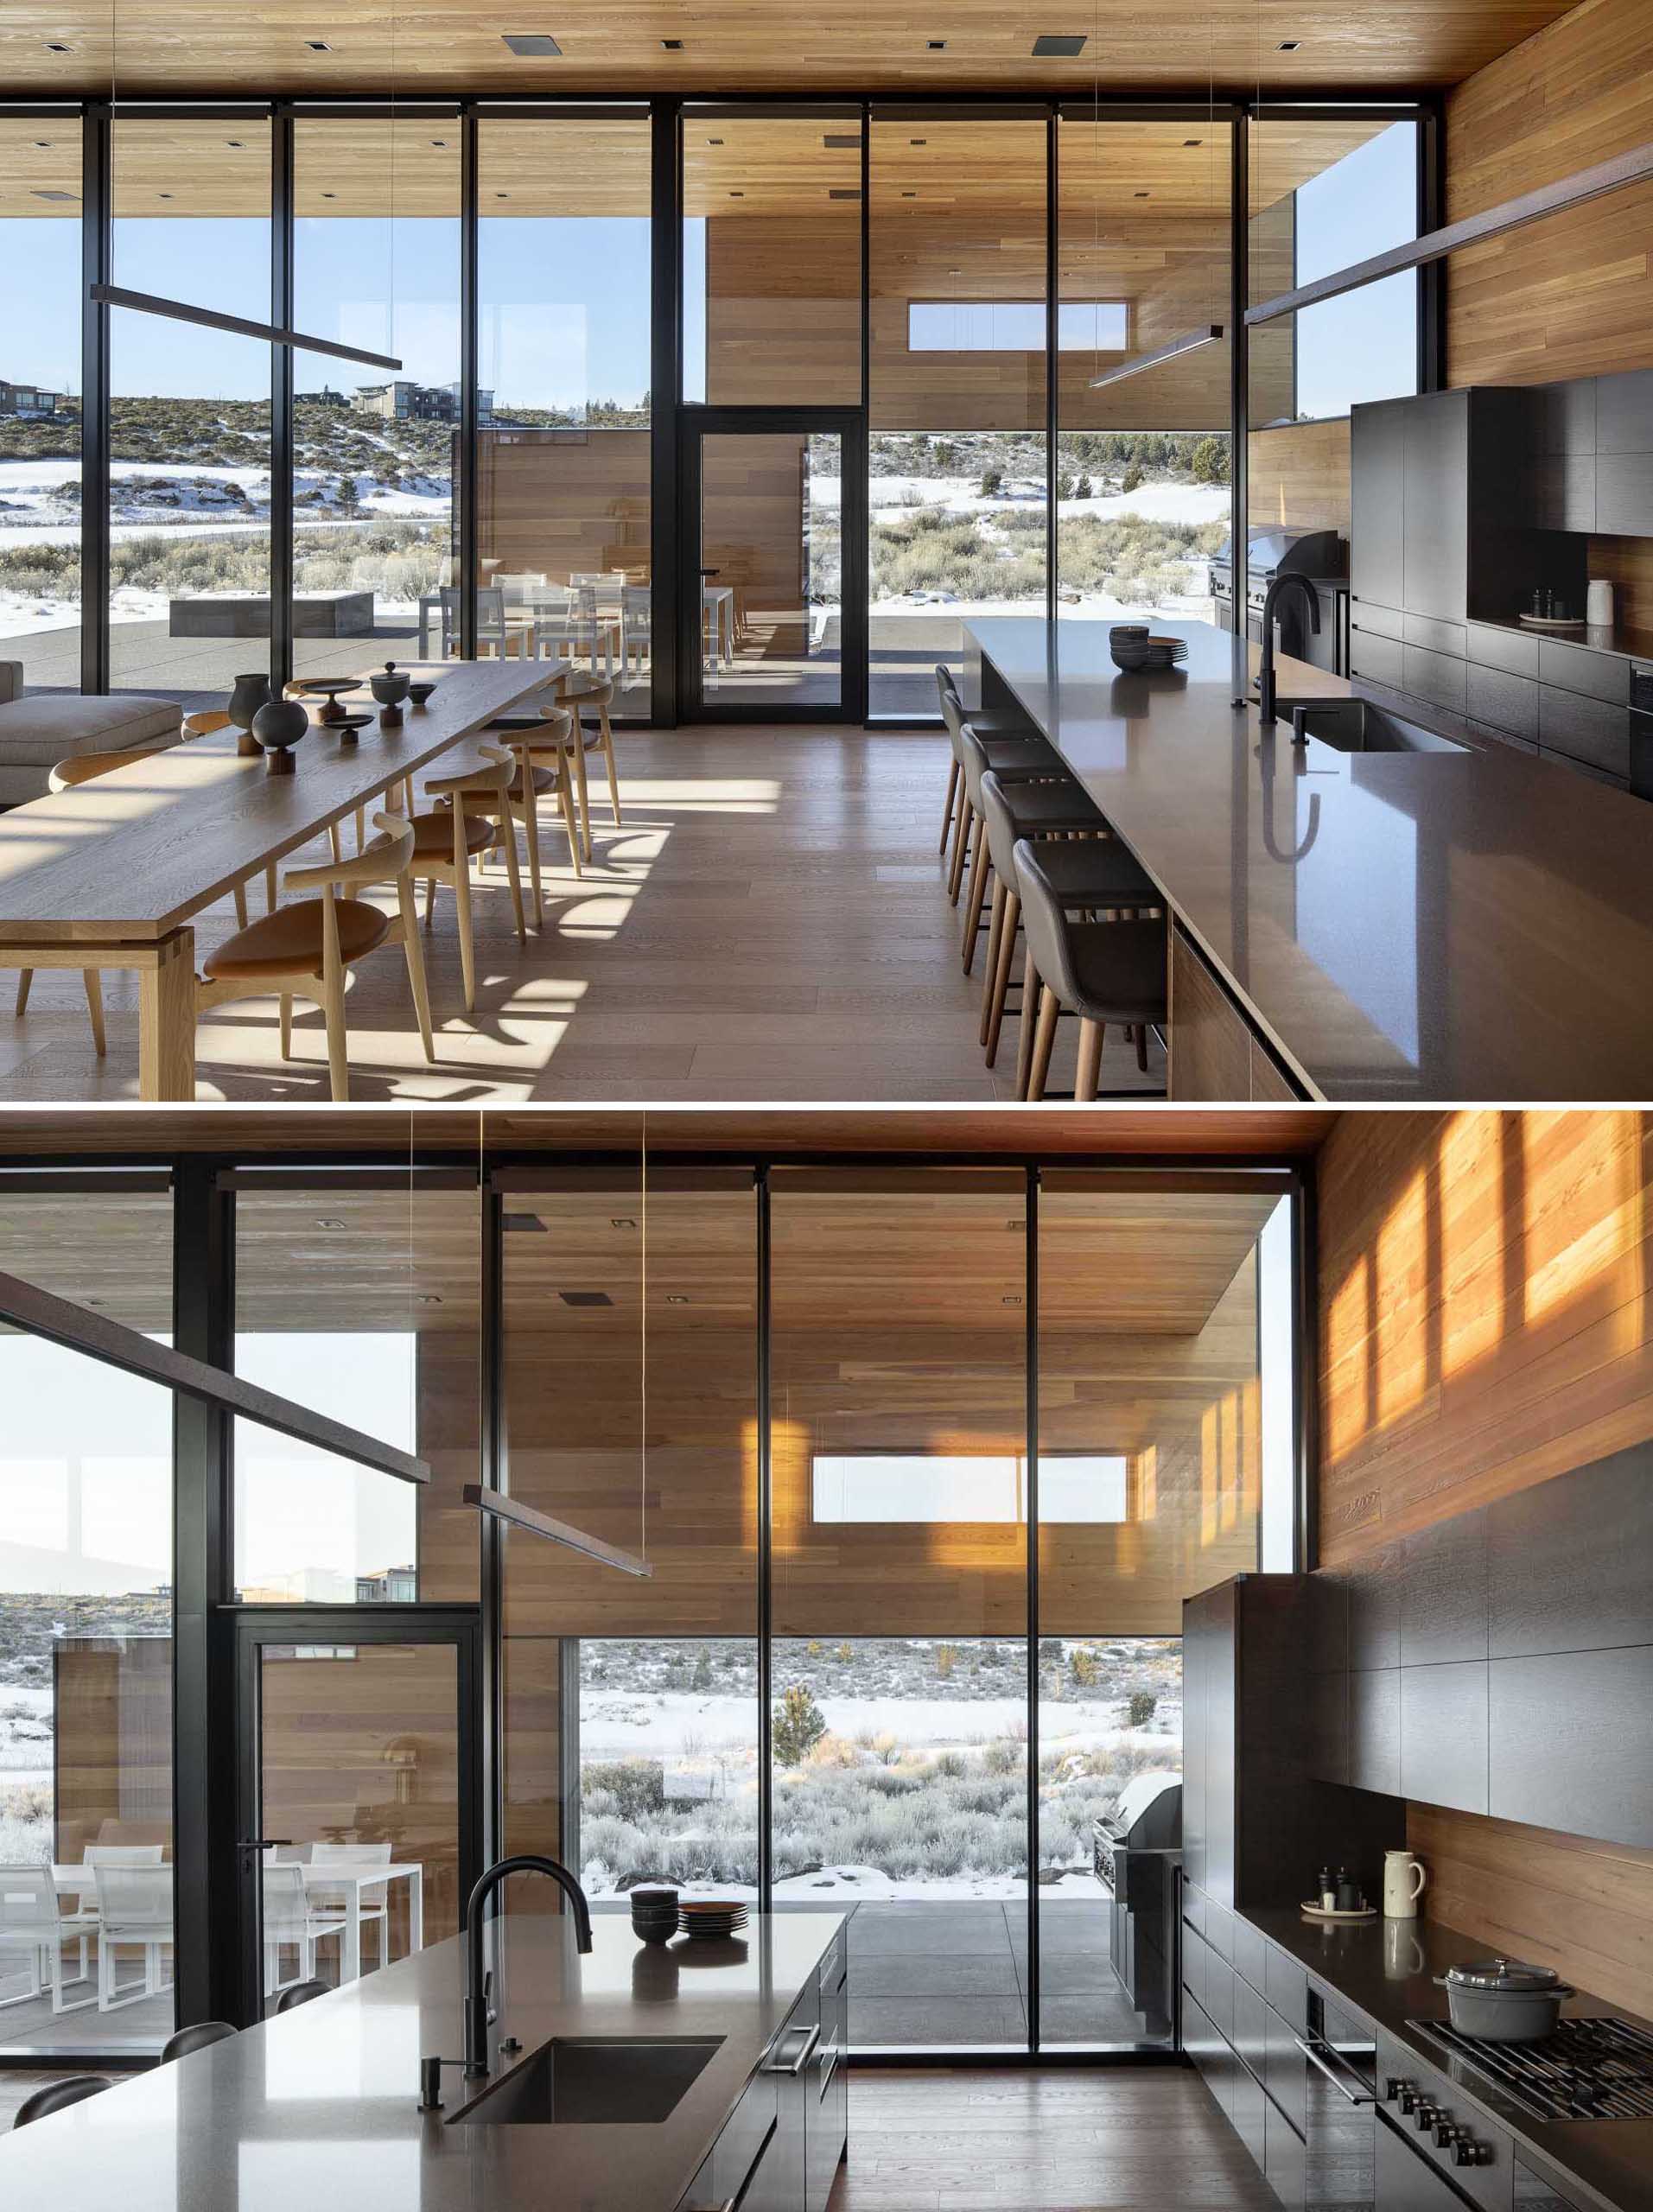 In this modern house with high ceilings, the dining area separates the living room from the kitchen, where black cabinets and a long island create a contrasting dark element to the open room.